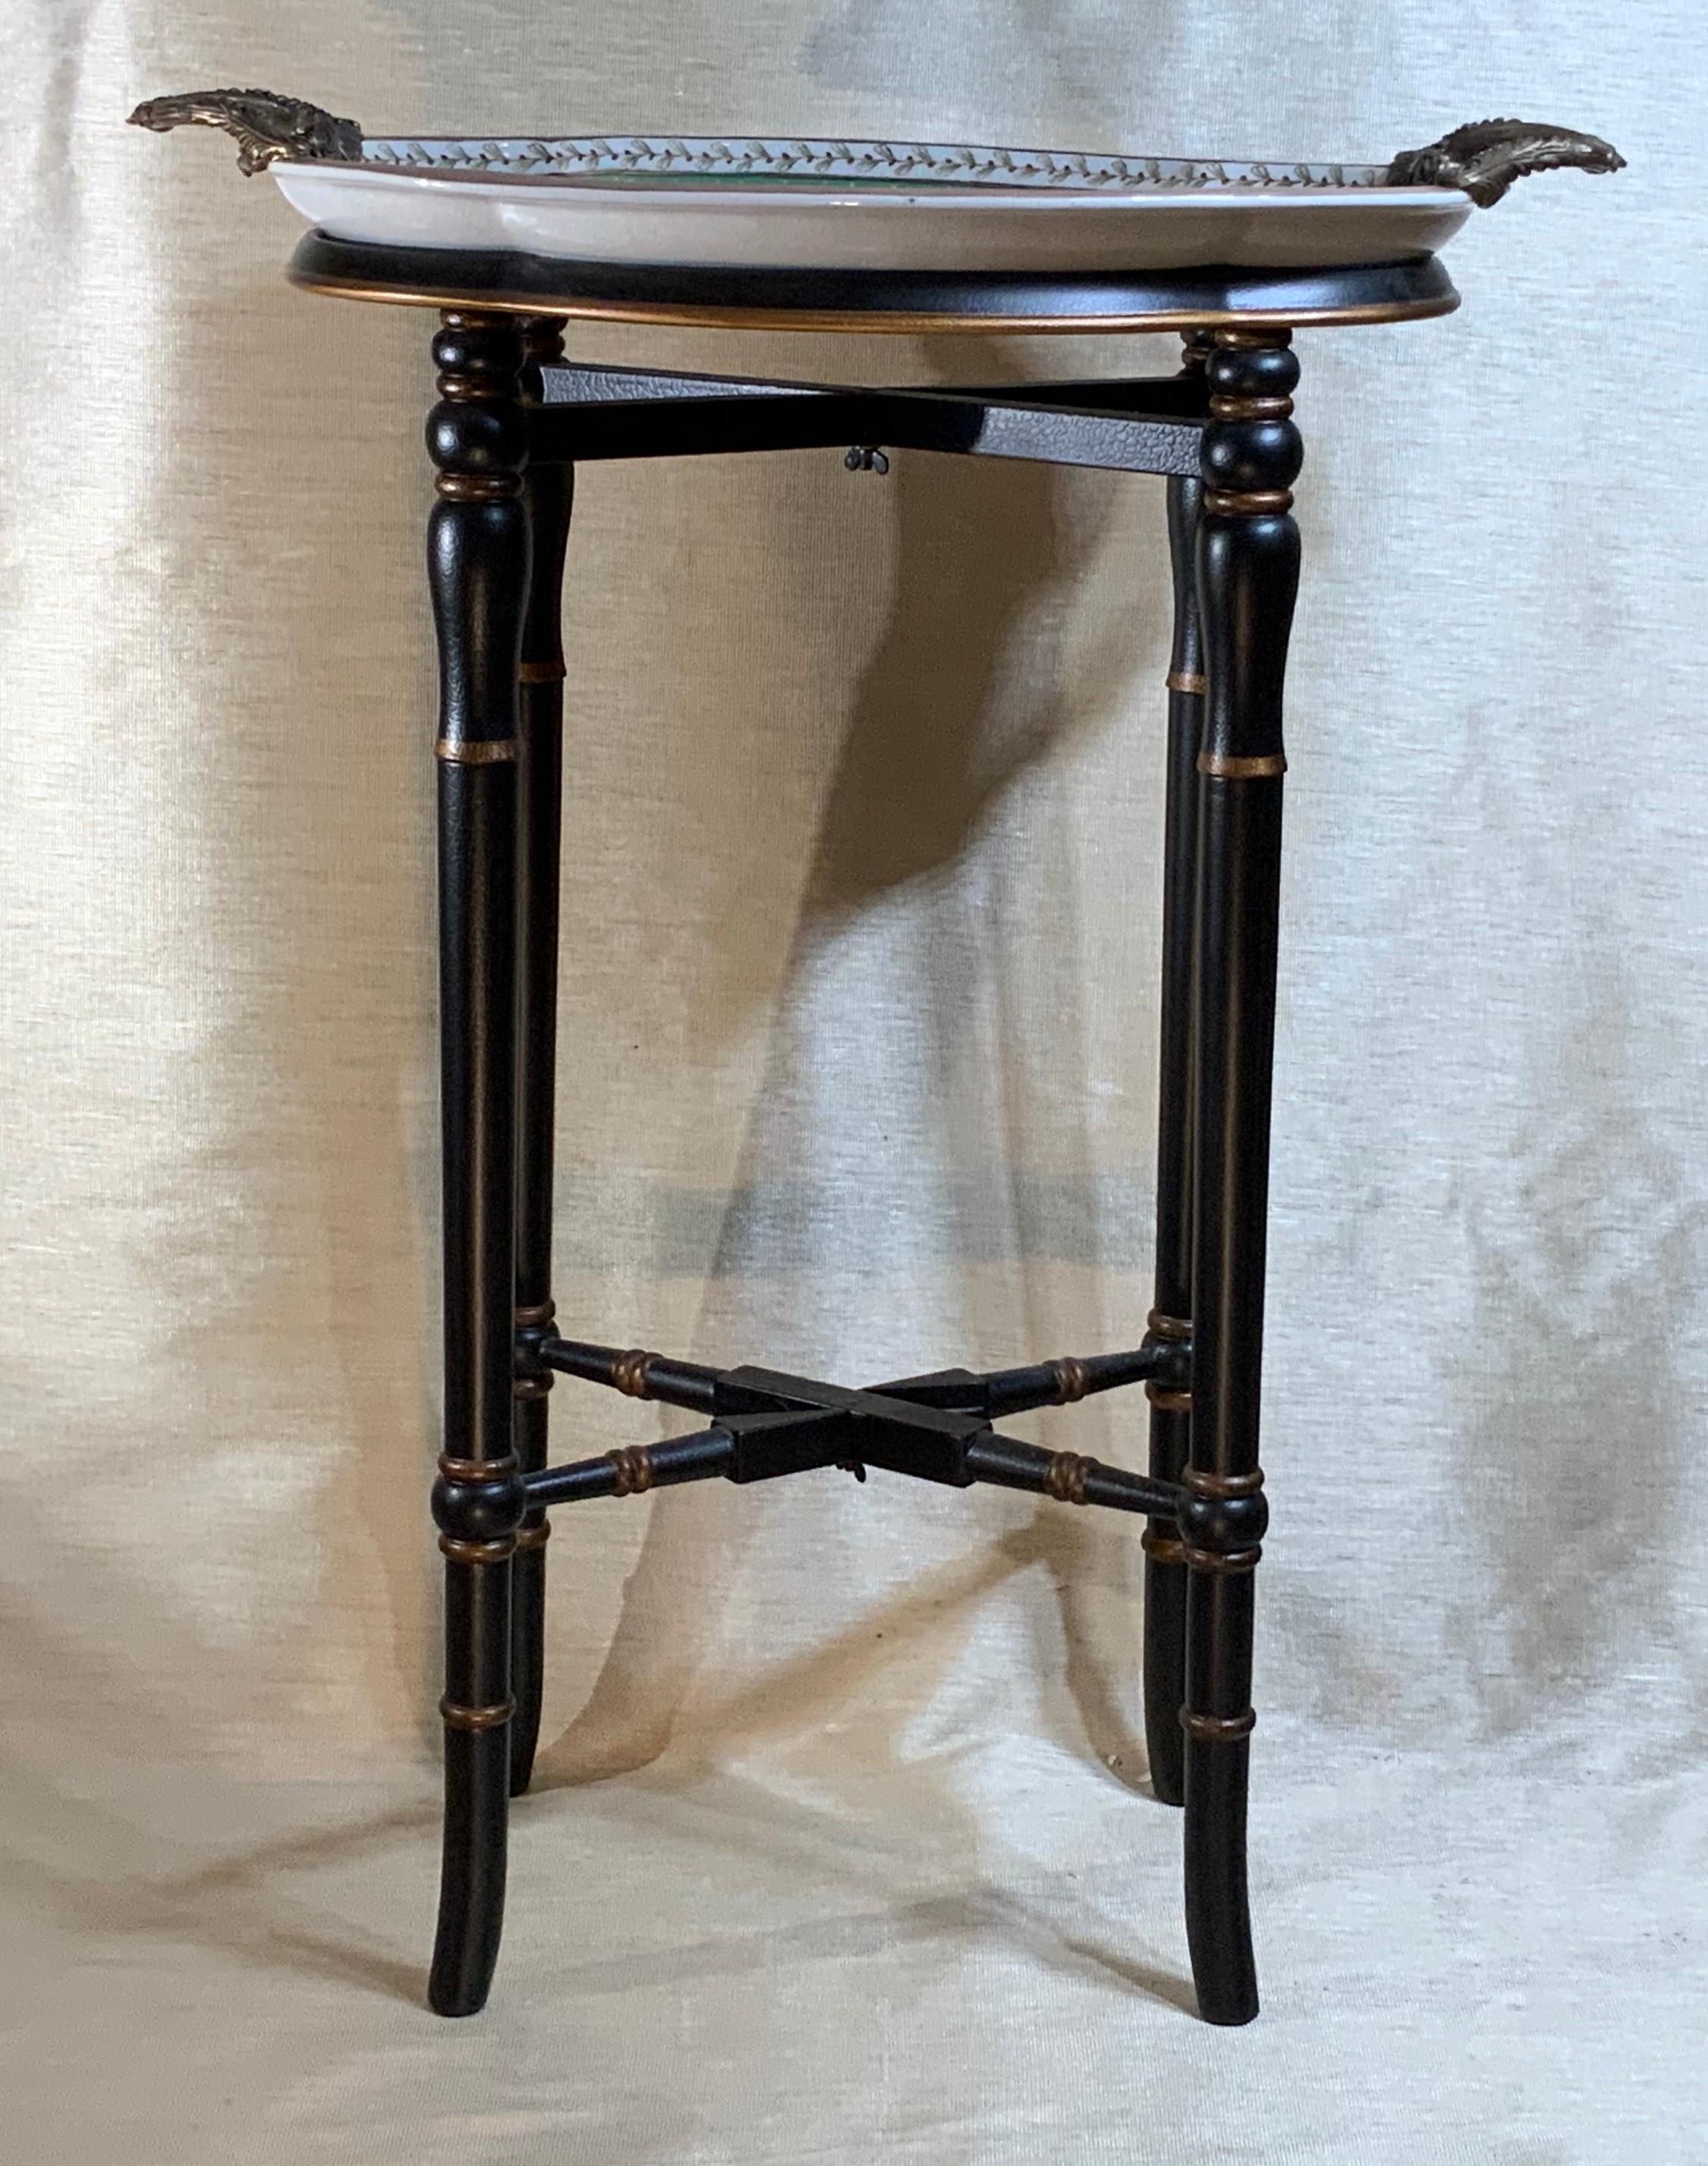 Elegant side stand made of four legs wood base, and separate porcelain top tray, that sit on the base, the tray is hand painted of beautiful floral motifs, and Has two bronze handles. Could use as dessert table, side table.
Practical piece of home